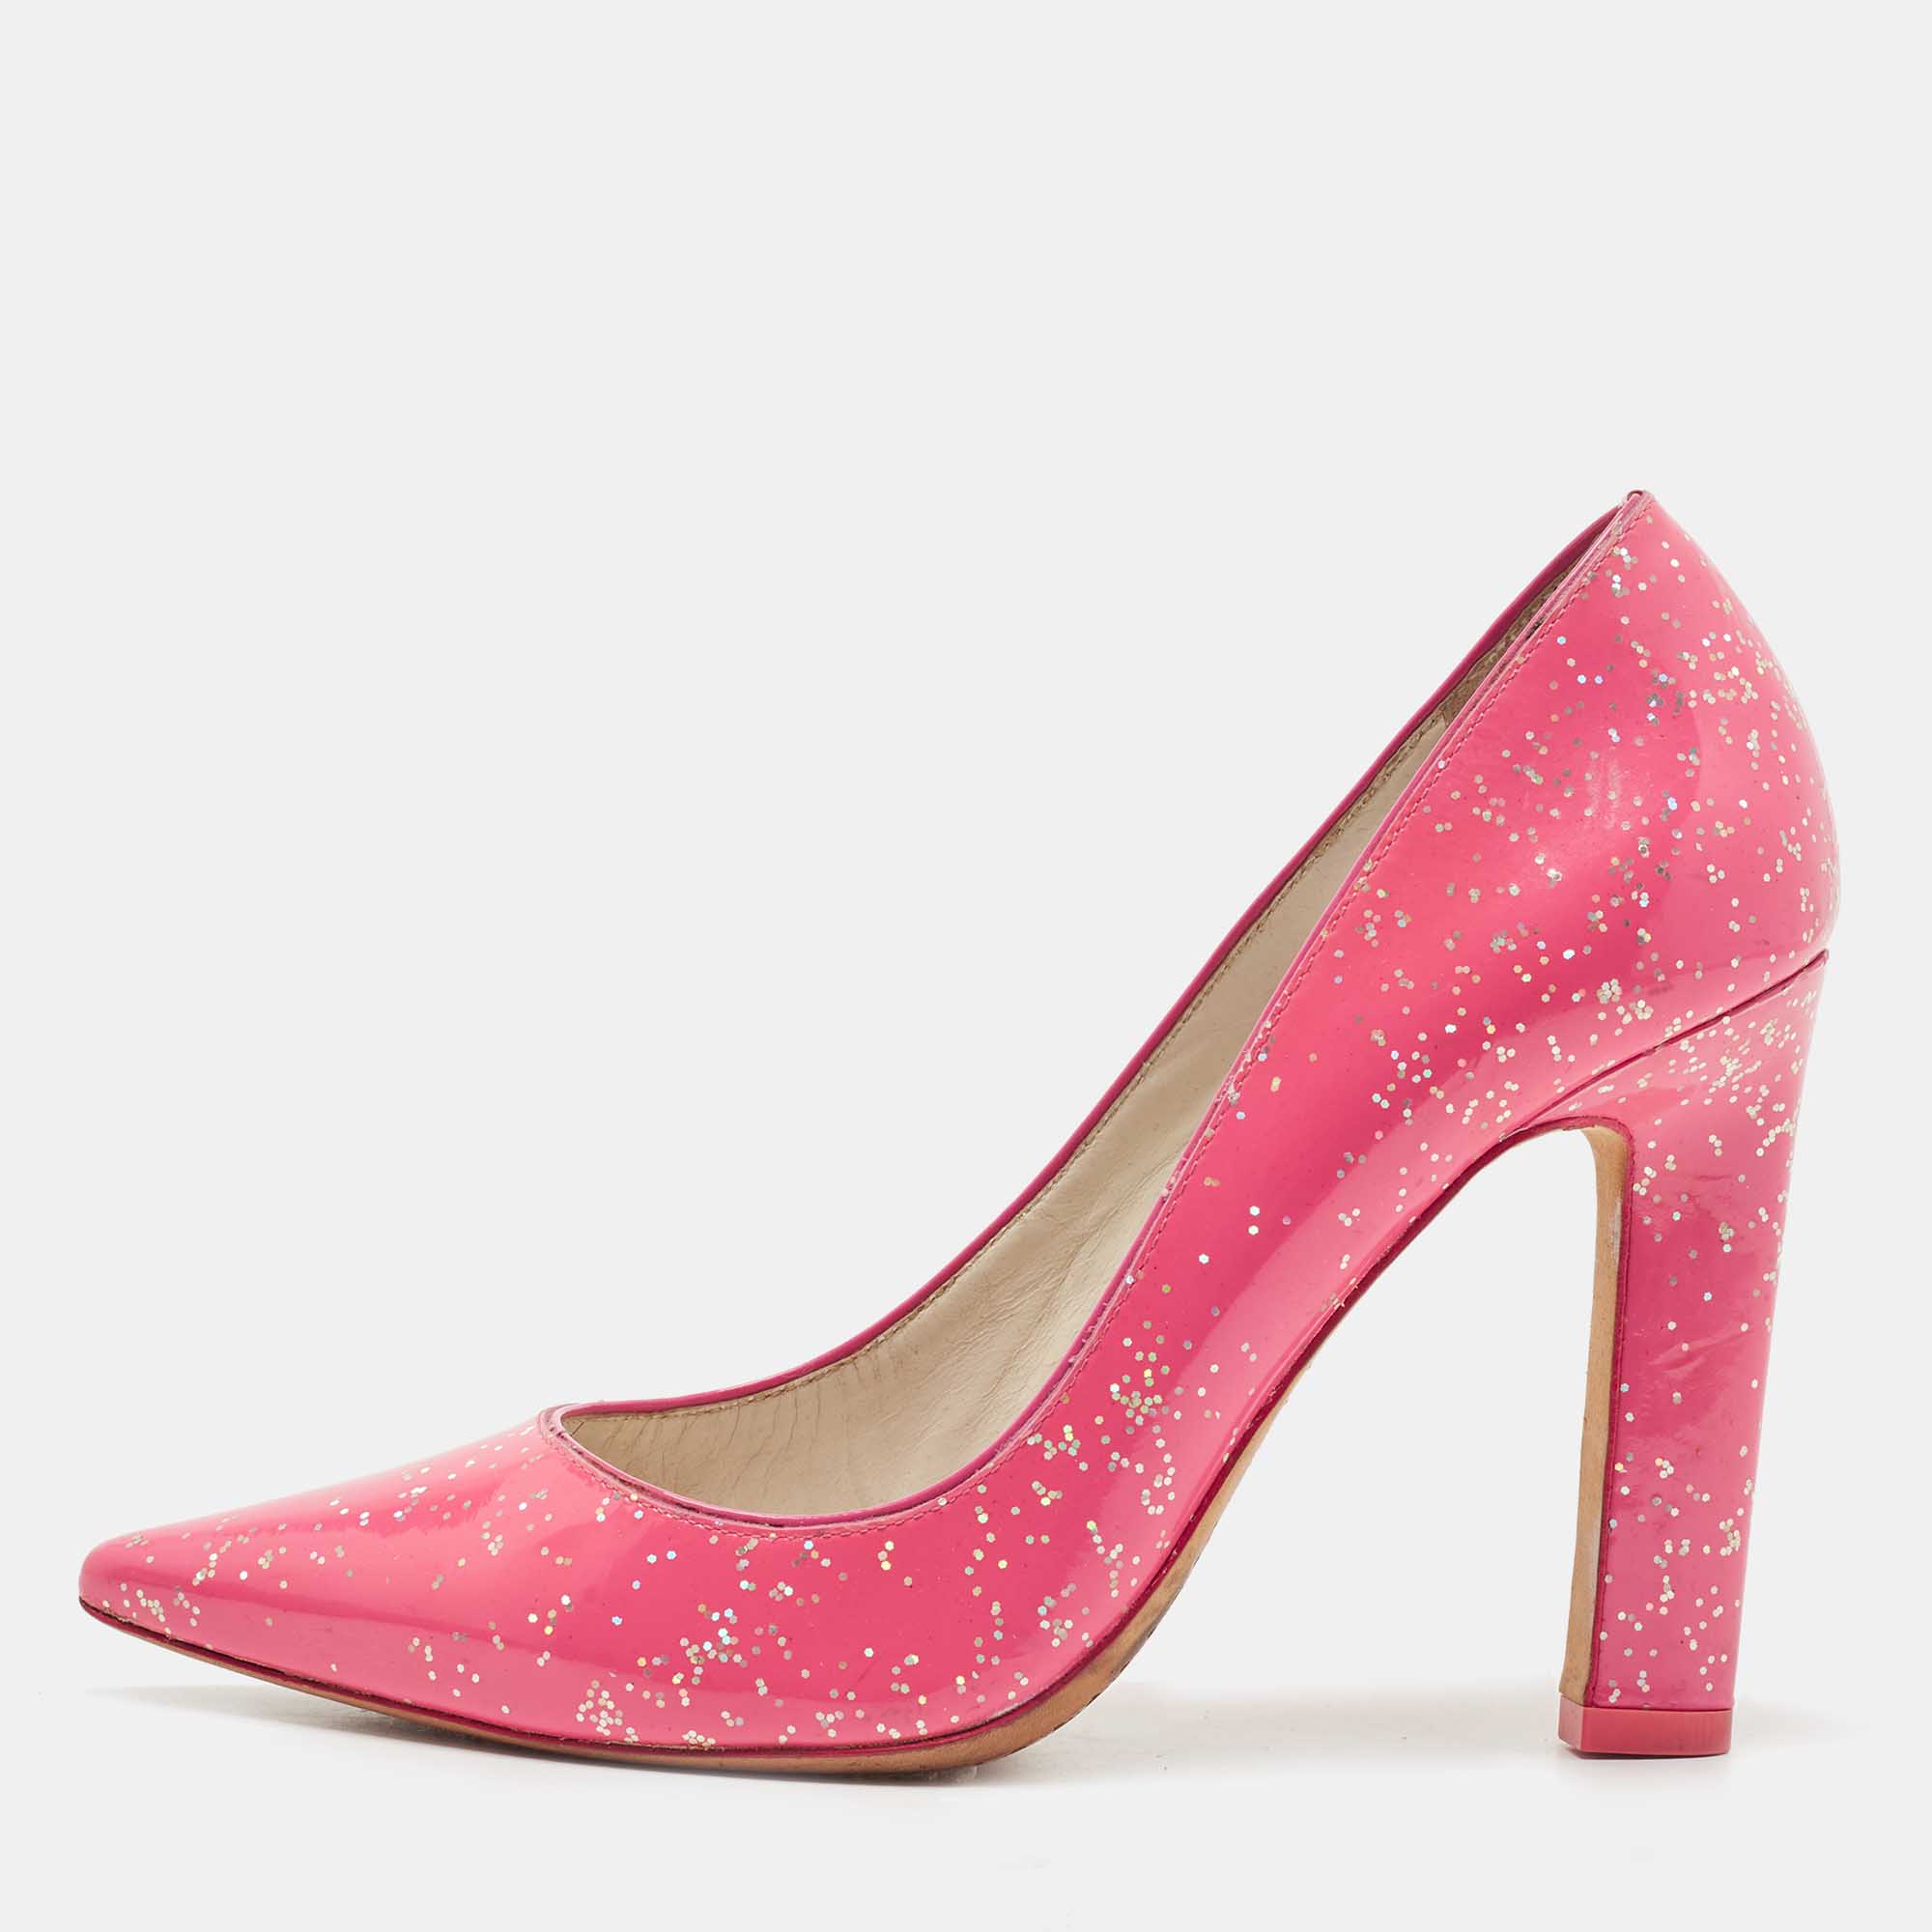 

Sophia Webster Pink Glitter Patent Leather Pointed Toe Pumps Size